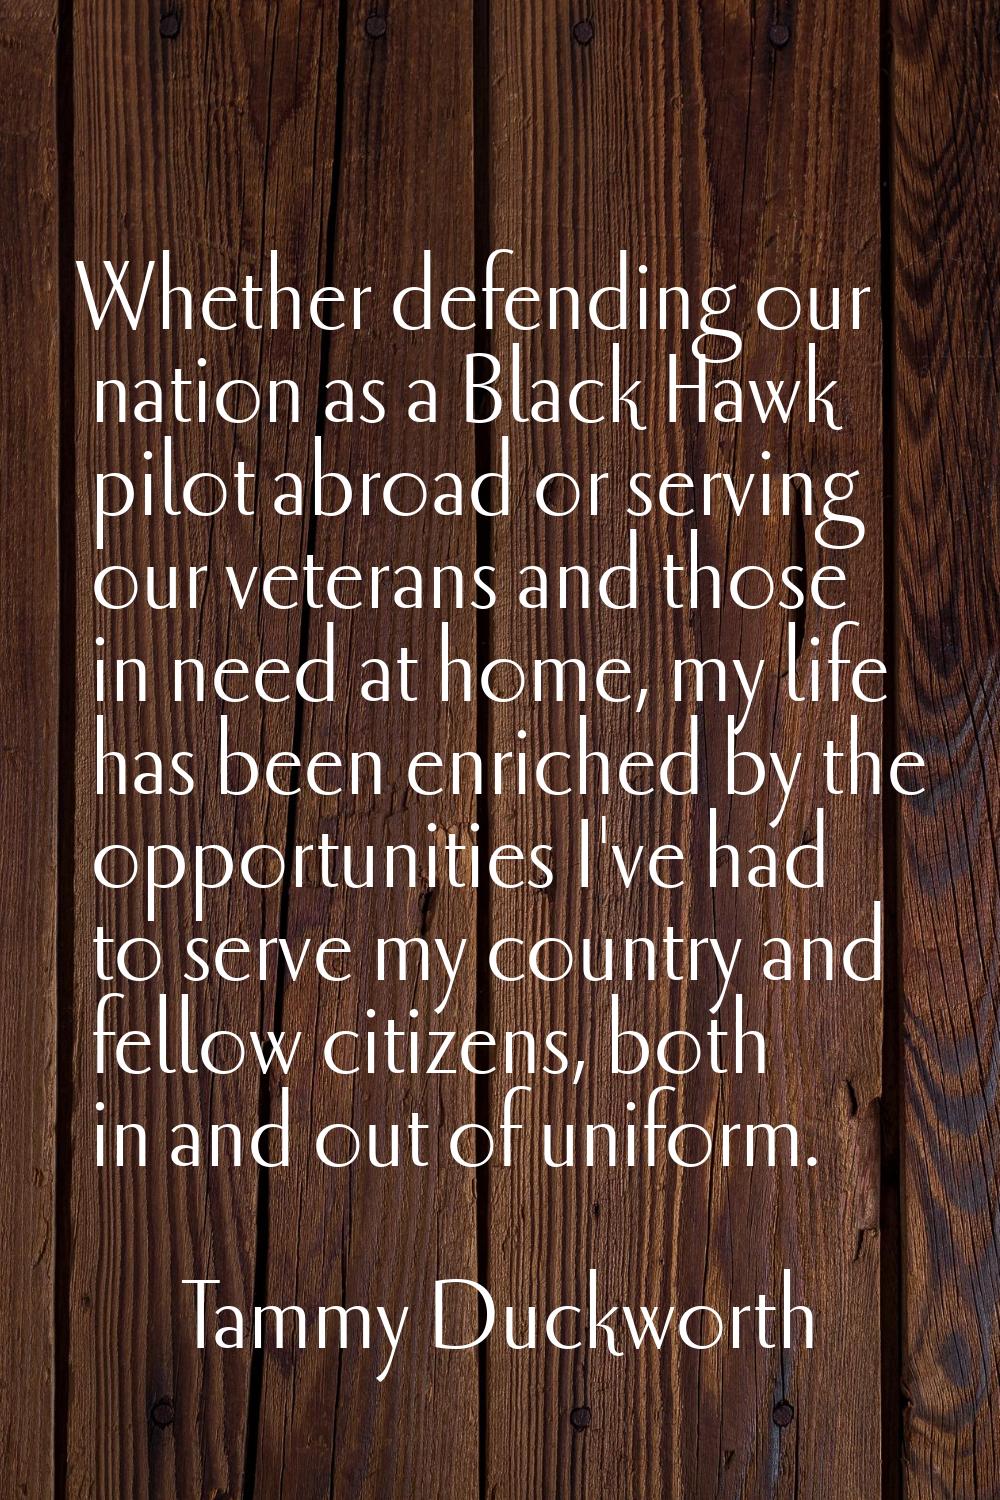 Whether defending our nation as a Black Hawk pilot abroad or serving our veterans and those in need